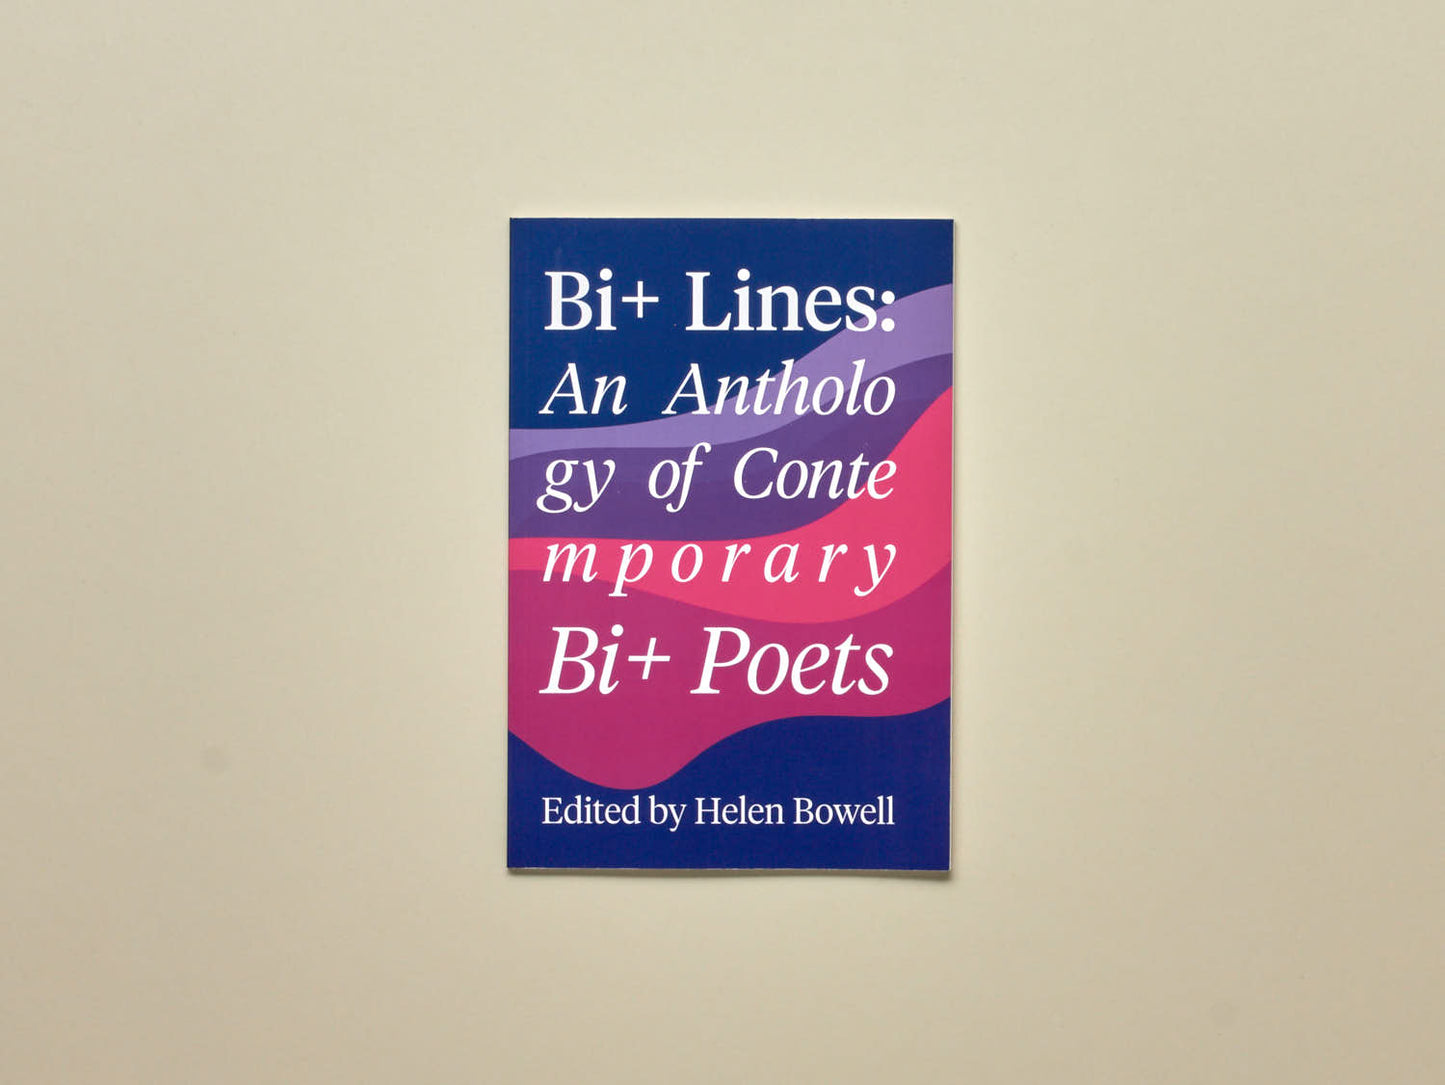 Helen Bowell (ed.), Bi+ Lines: an anthology of contemporary Bi+ poetry